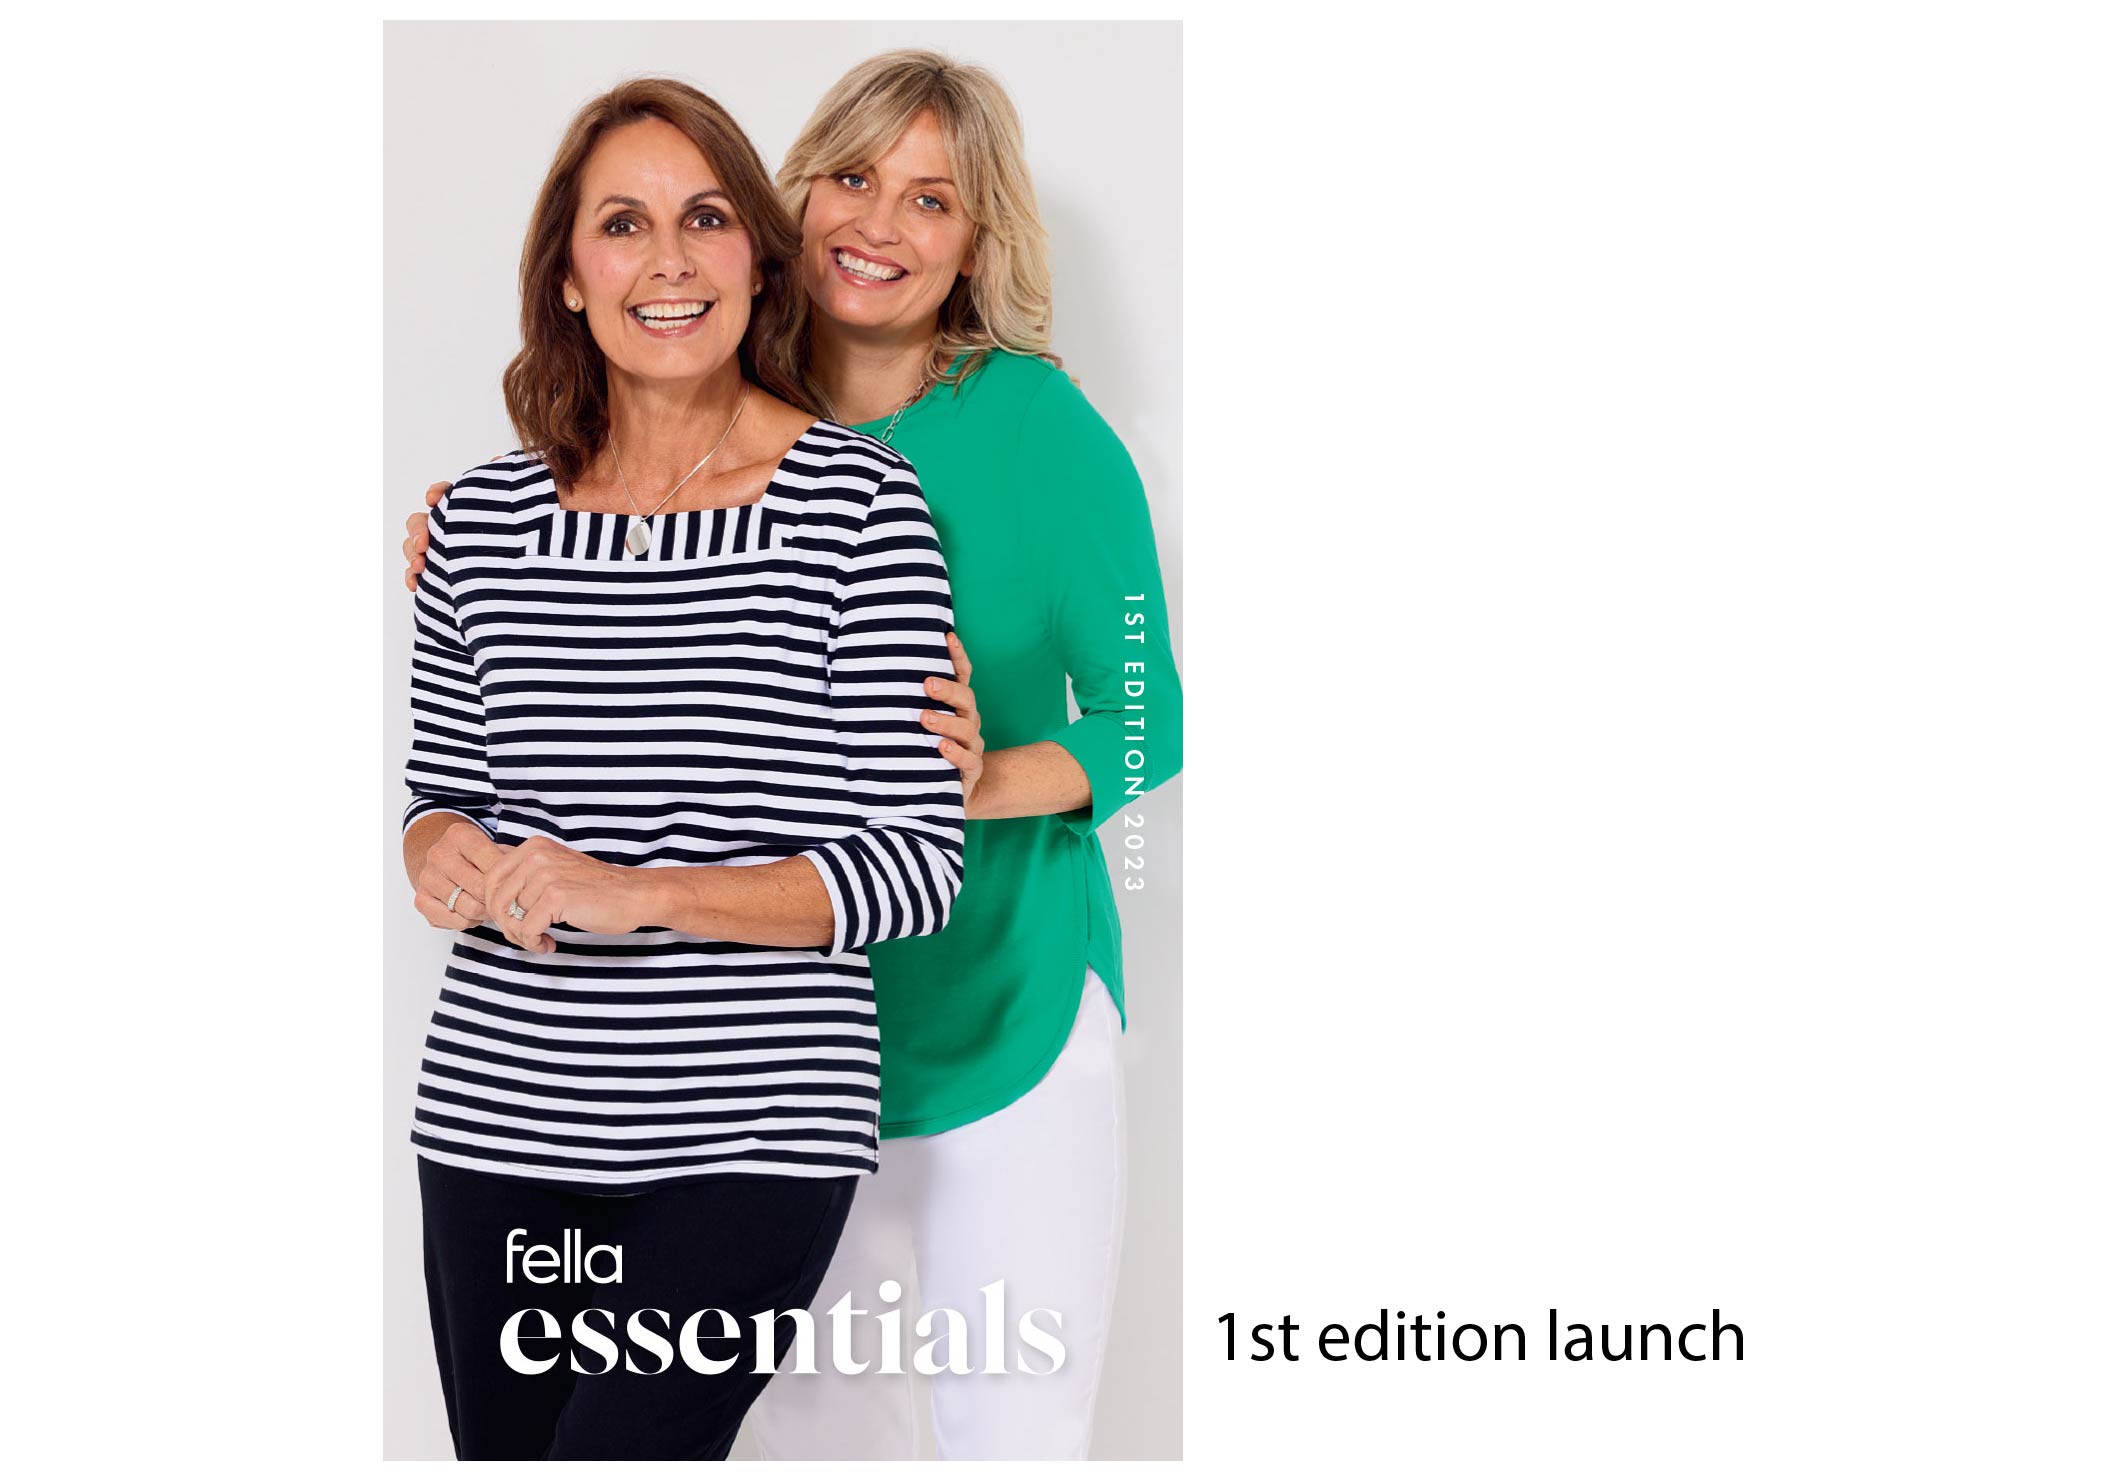 Fella Essential catalogue image with models wearing stripe top and green top 